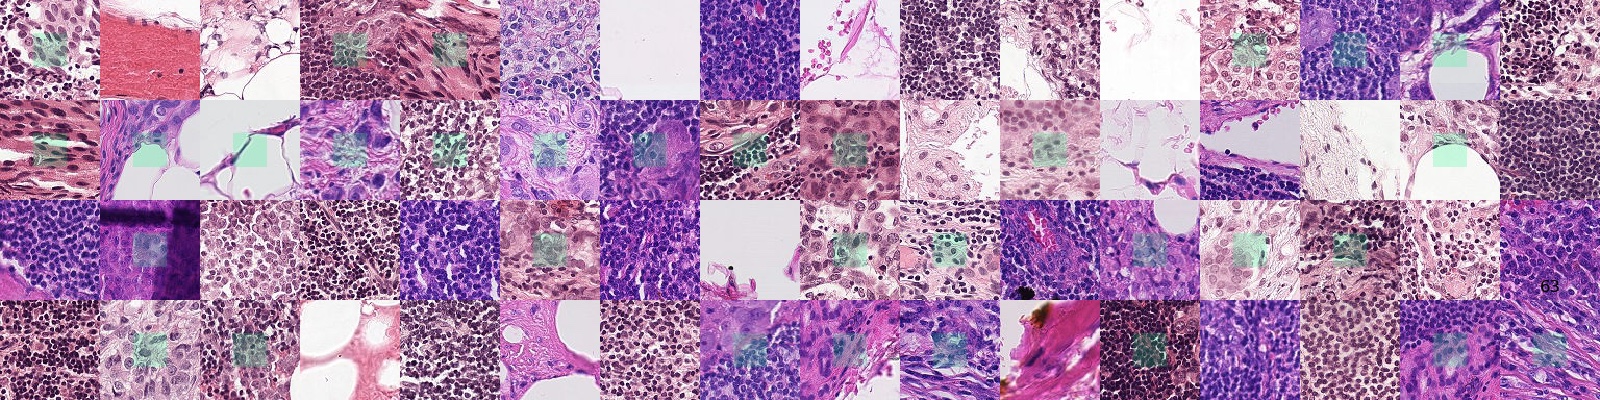 Examples from PCam. Green boxes indicate tumor tissue in center region, which dictates a positive label.